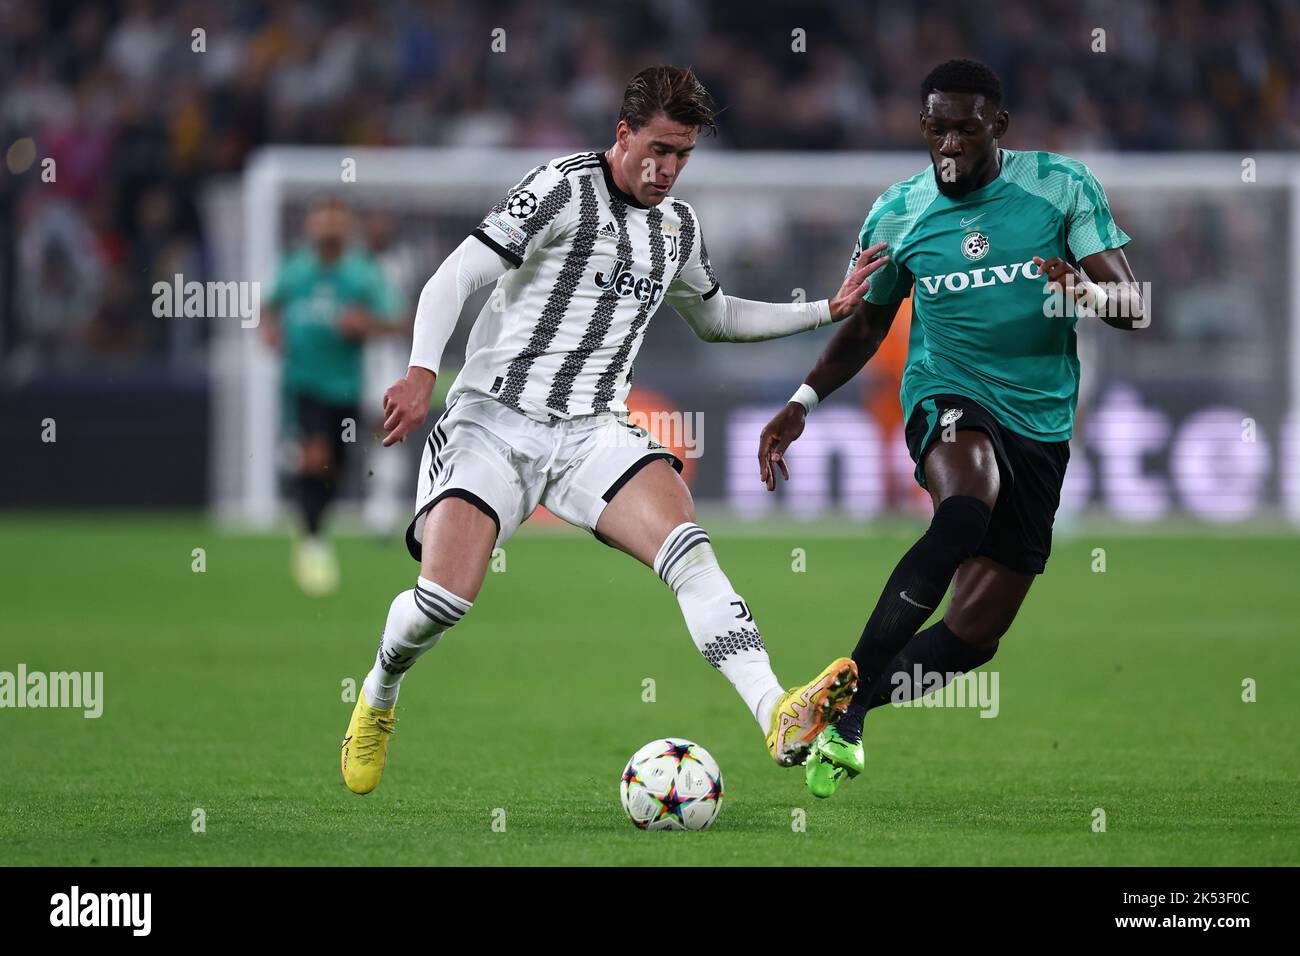 Turin, Italy . October 5, 2022, Dusan Vlahovic of Juventus Fc battle and Ali Mohamed of Maccabi Haifa for the ball during the Uefa Champions League Group H match beetween Juventus Fc and M. K. Maccabi Haifa at Allianz Stadium on October 5, 2022 in Turin, Italy . Stock Photo